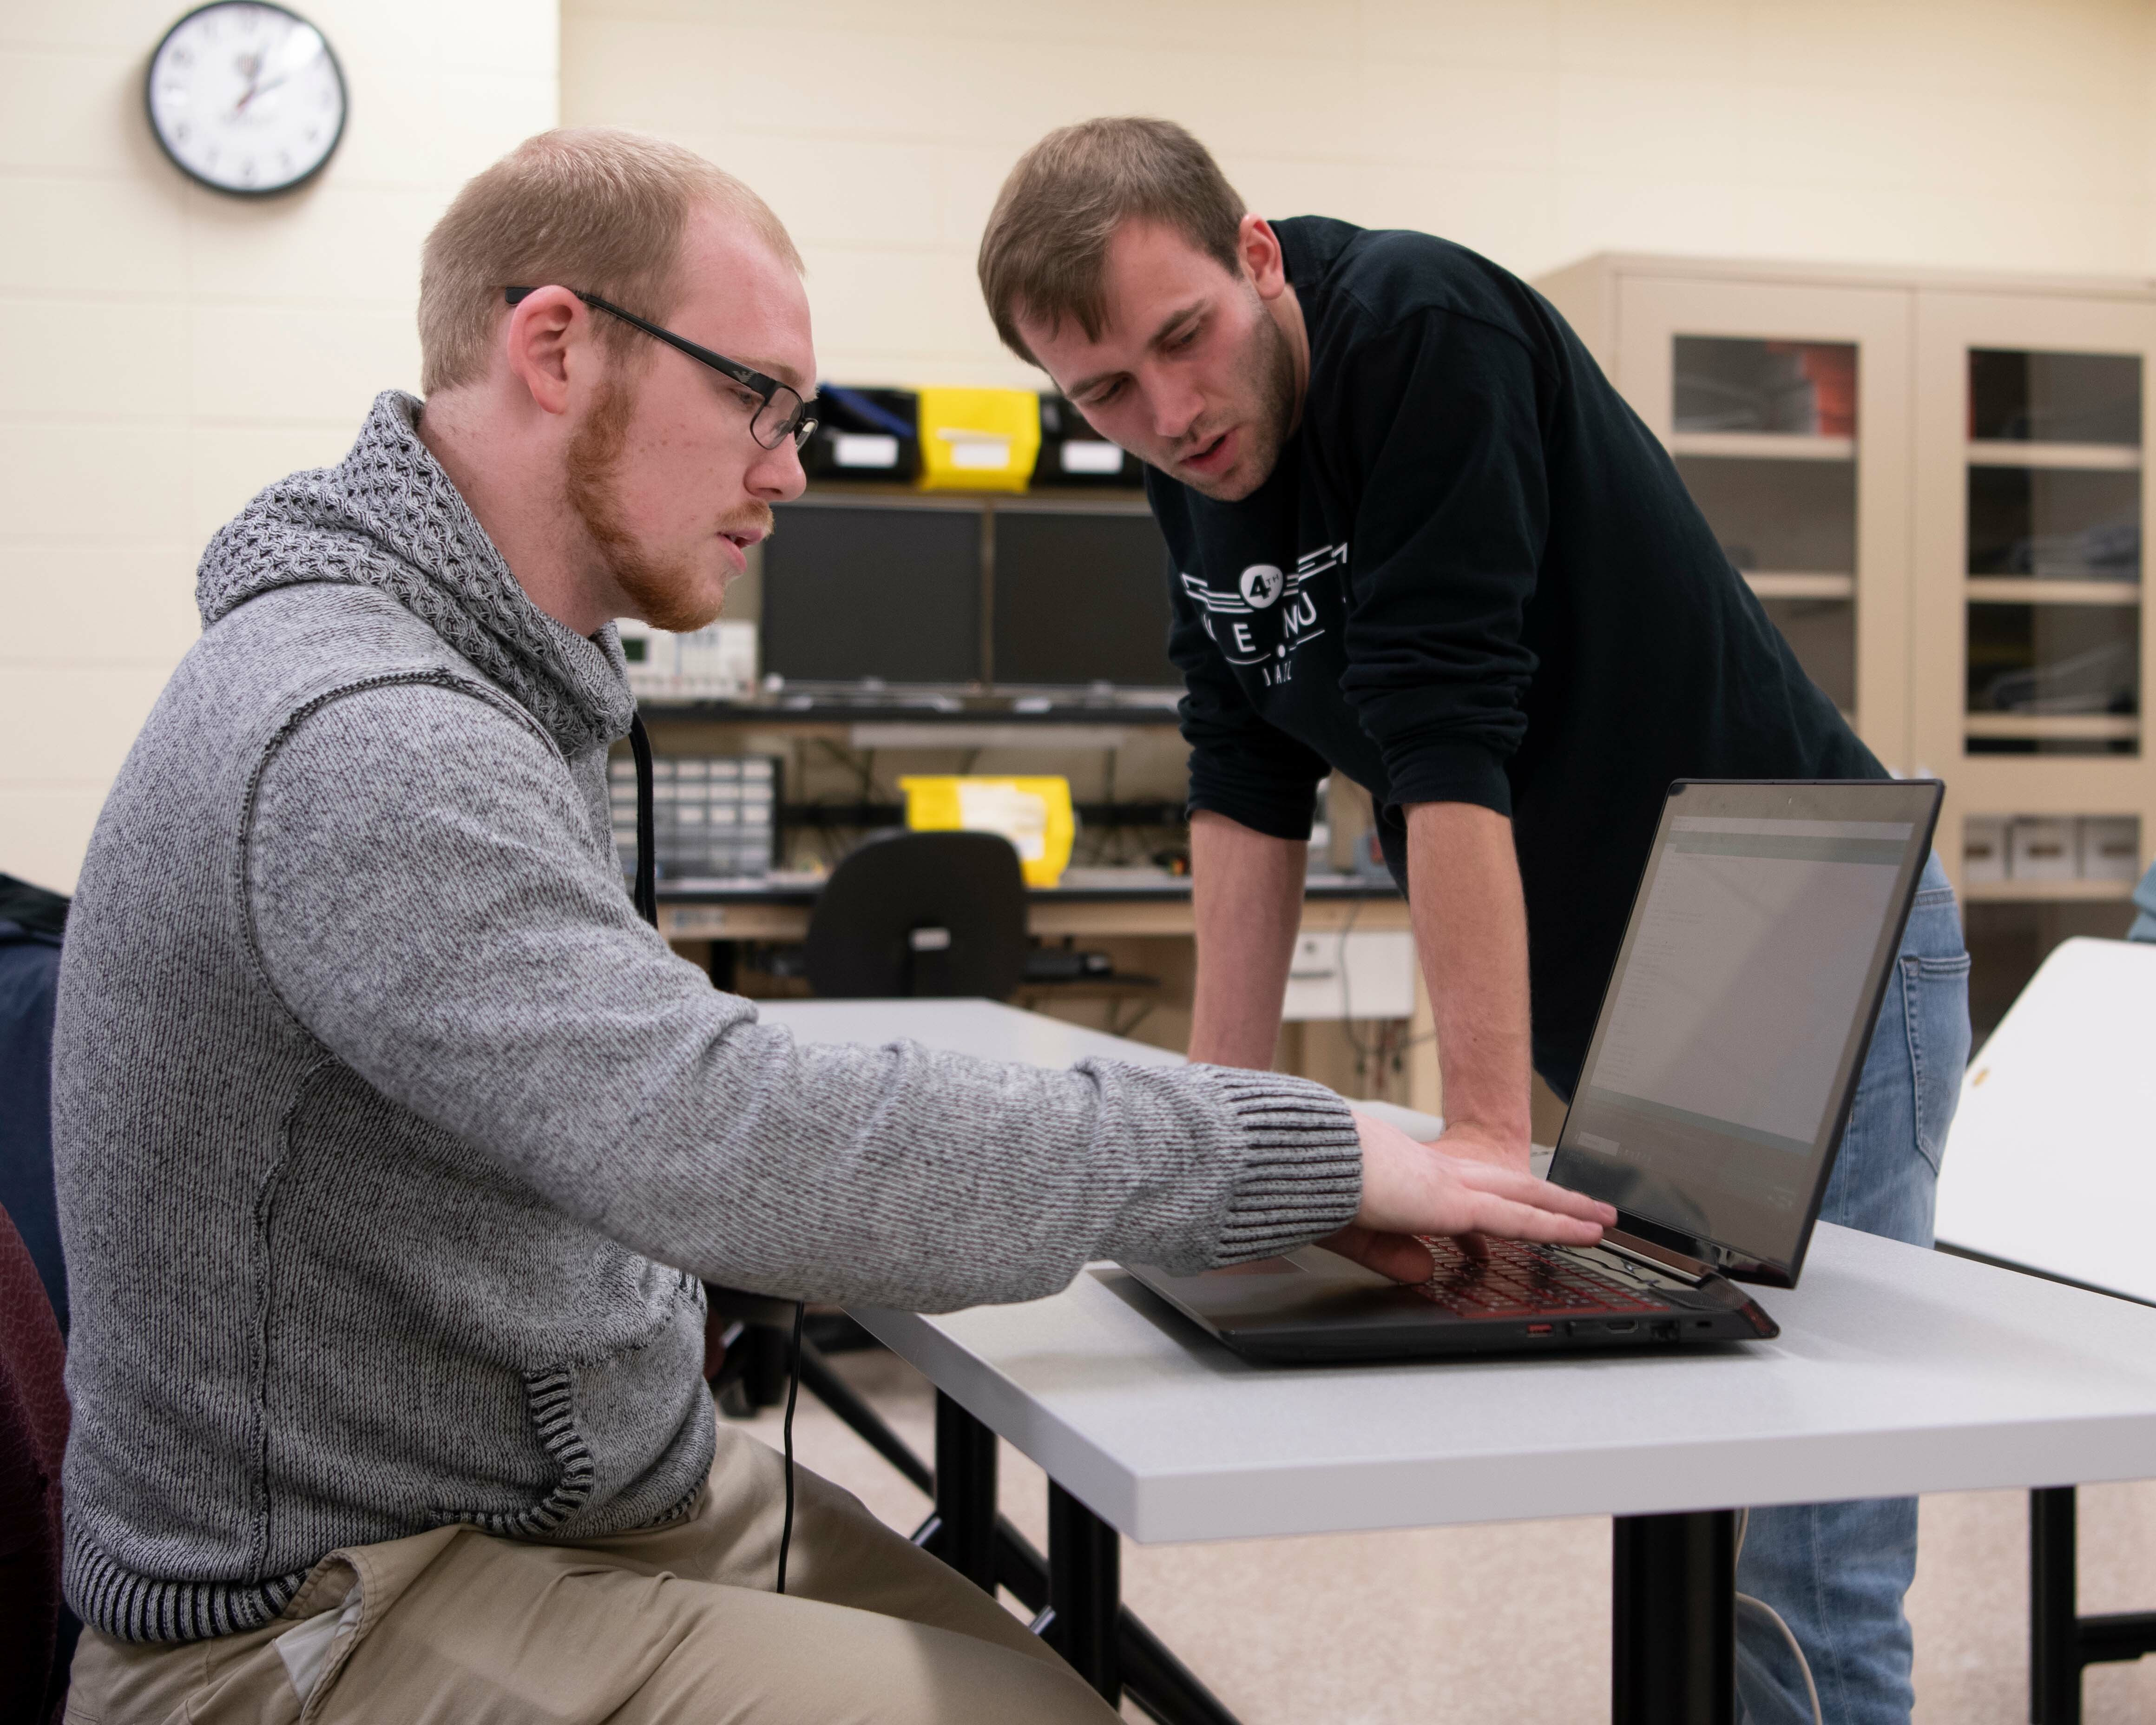 Two male students look at a laptop